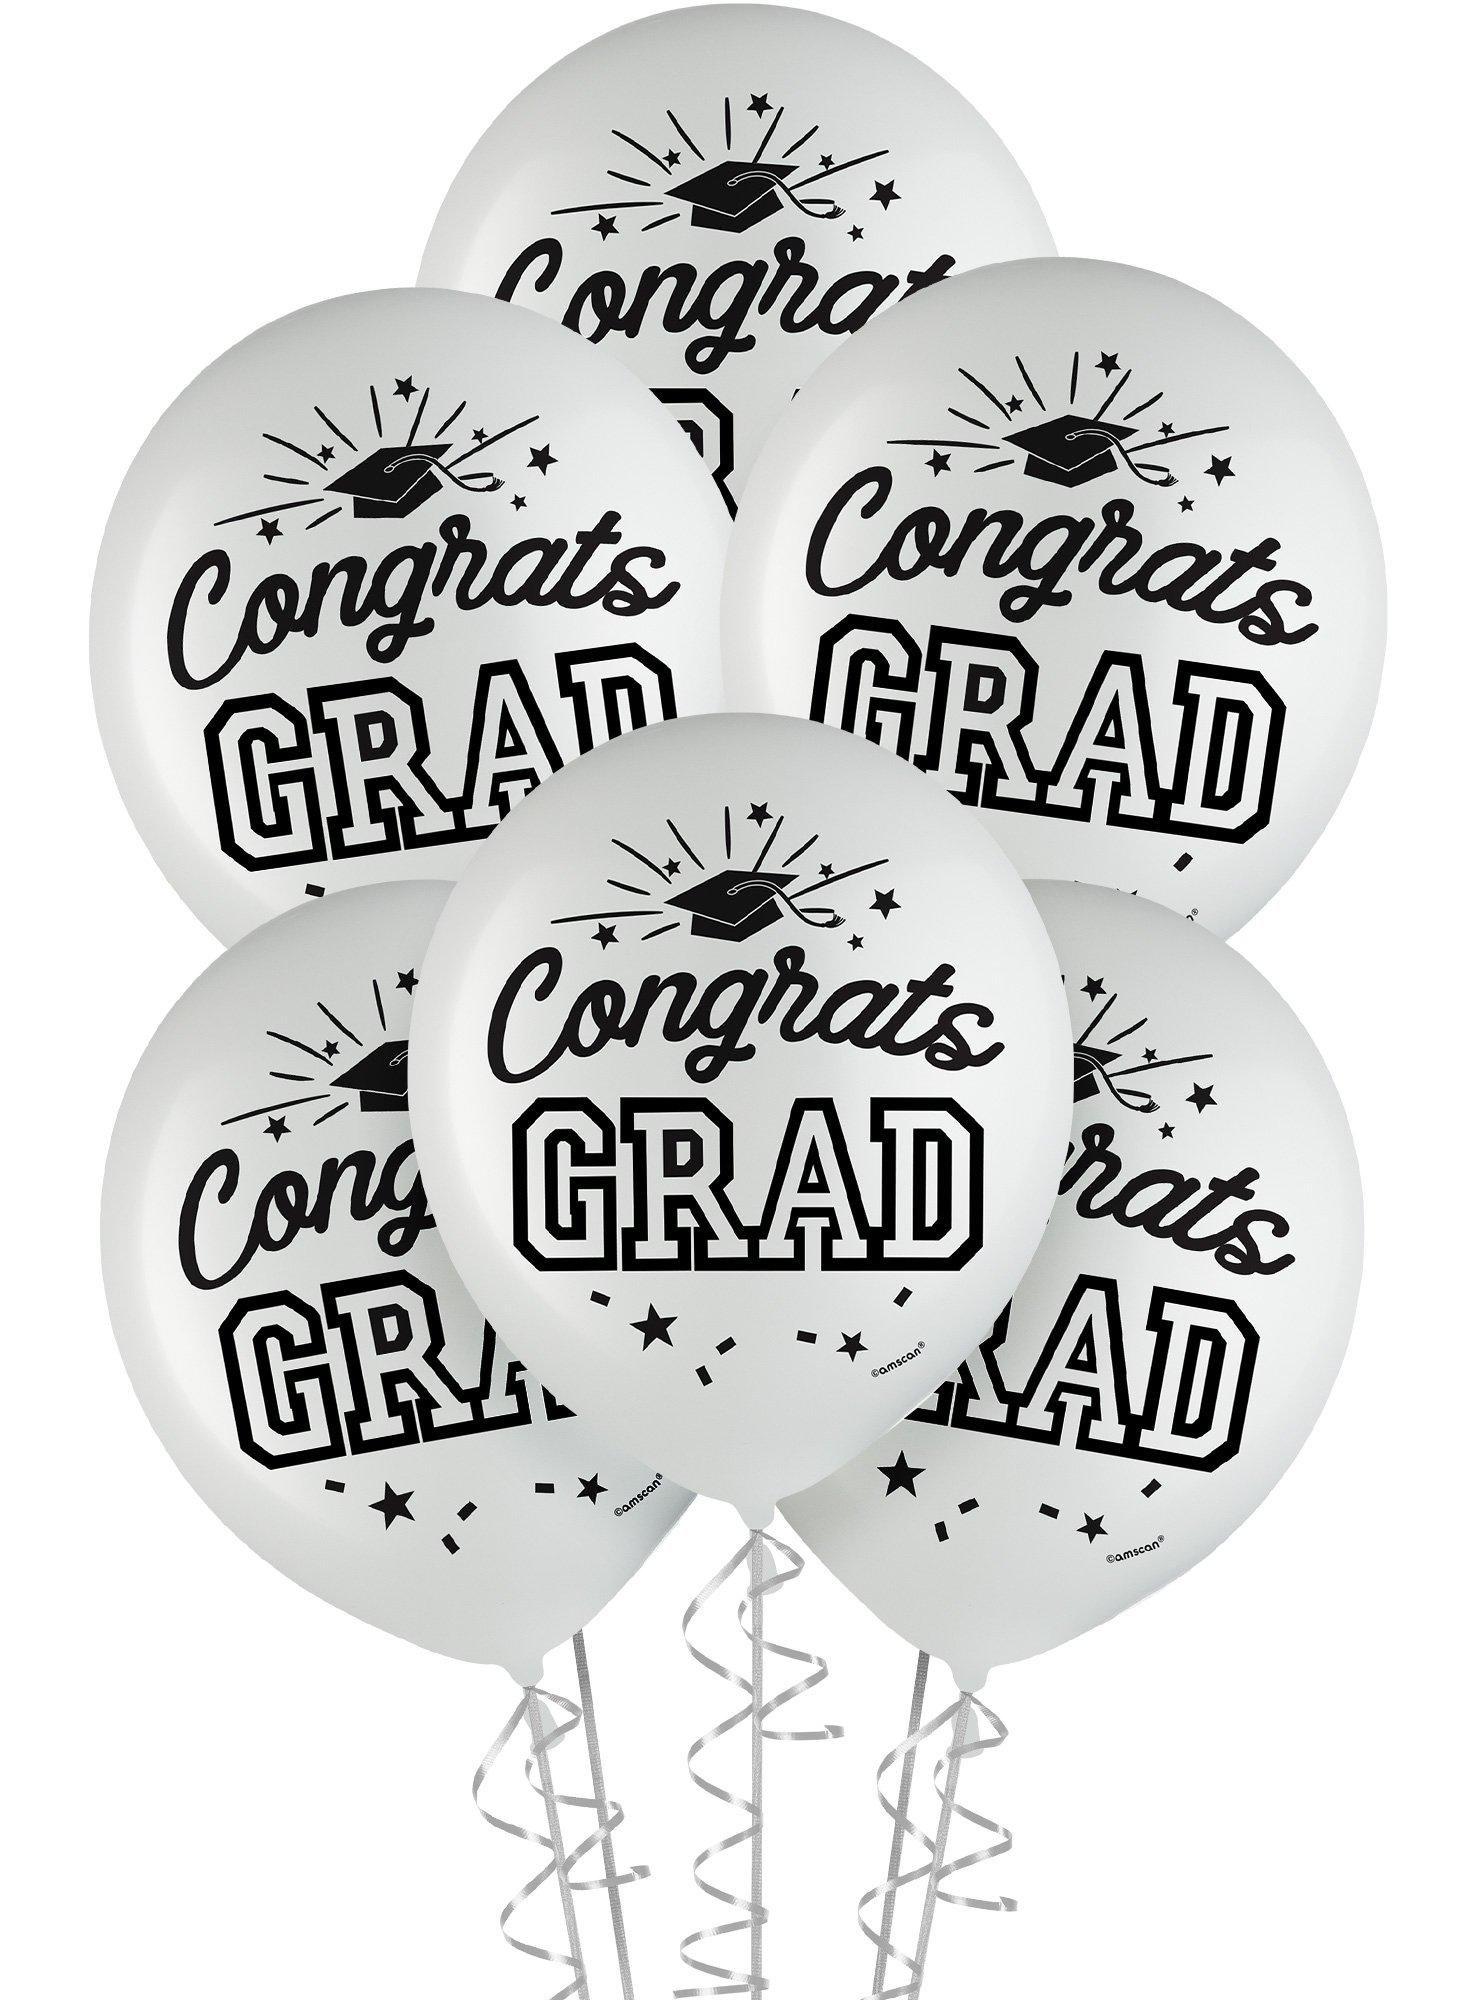 Graduation Party Decorations Kit with Banners, Balloons, Centerpiece, Streamers - White 2024 Congrats Grad